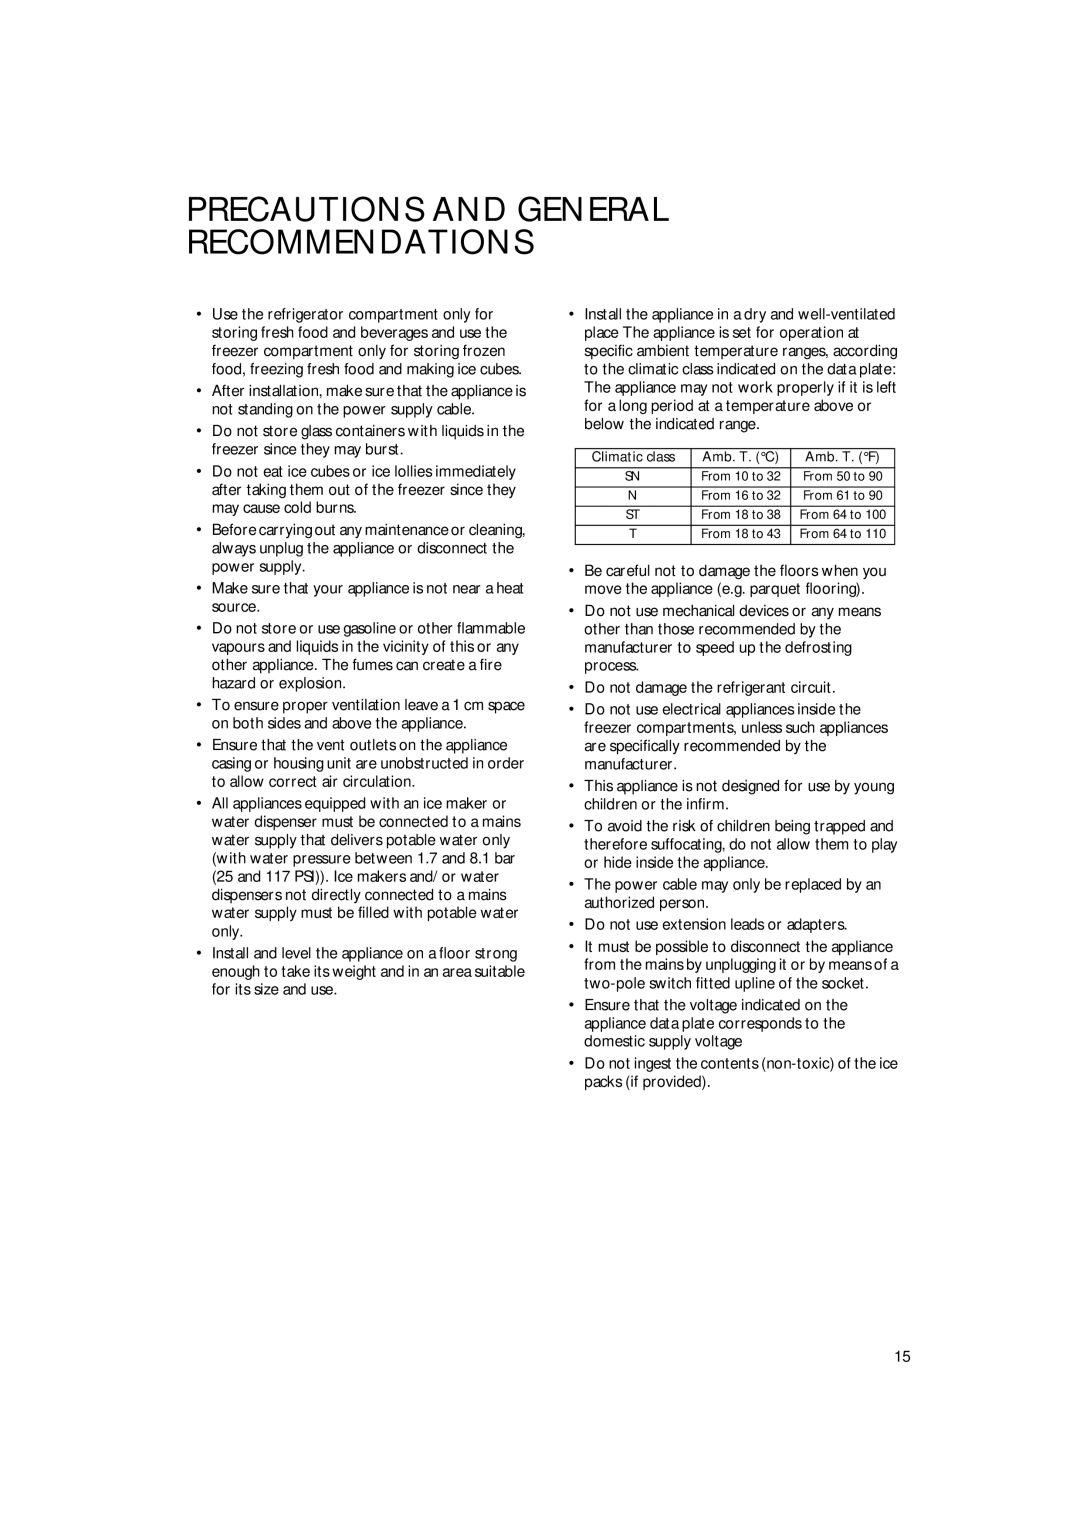 Smeg CR324A manual Precautions And General Recommendations, Do not damage the refrigerant circuit 